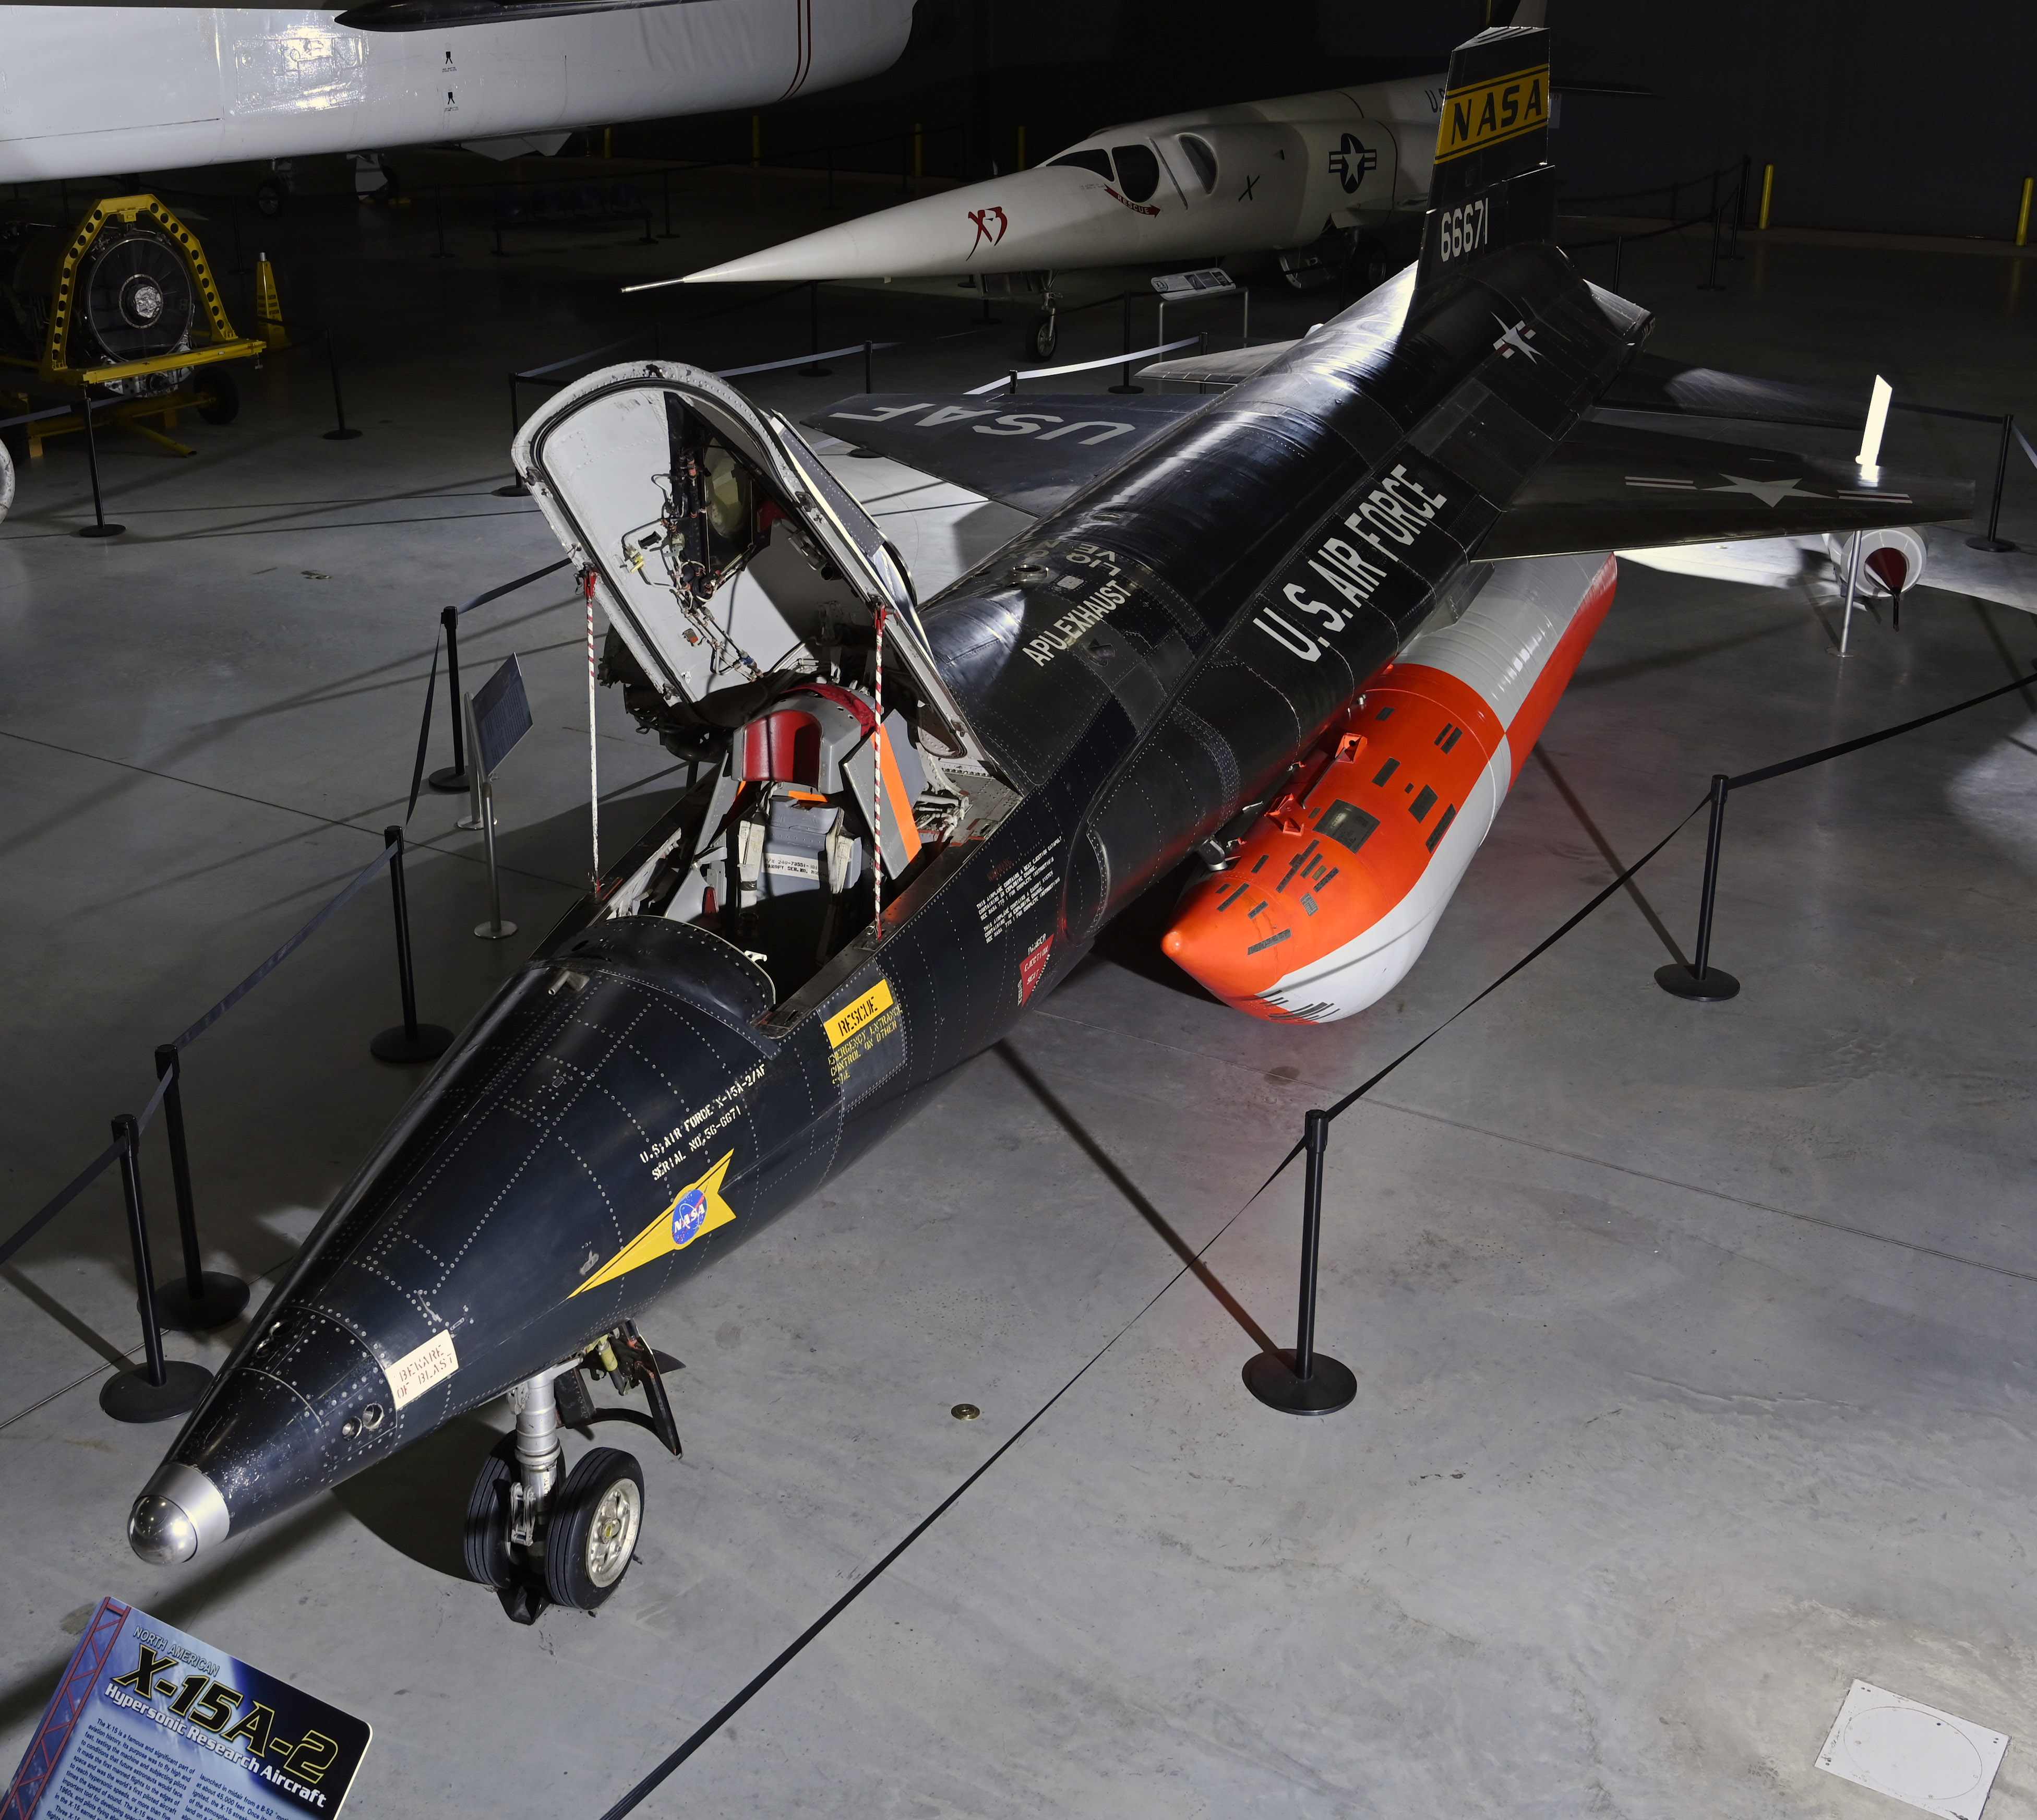 The X-15A-2 on display at the National Museum of the Air Force at Wright-Patterson Air Force Base (AFB), in Dayton, Ohio